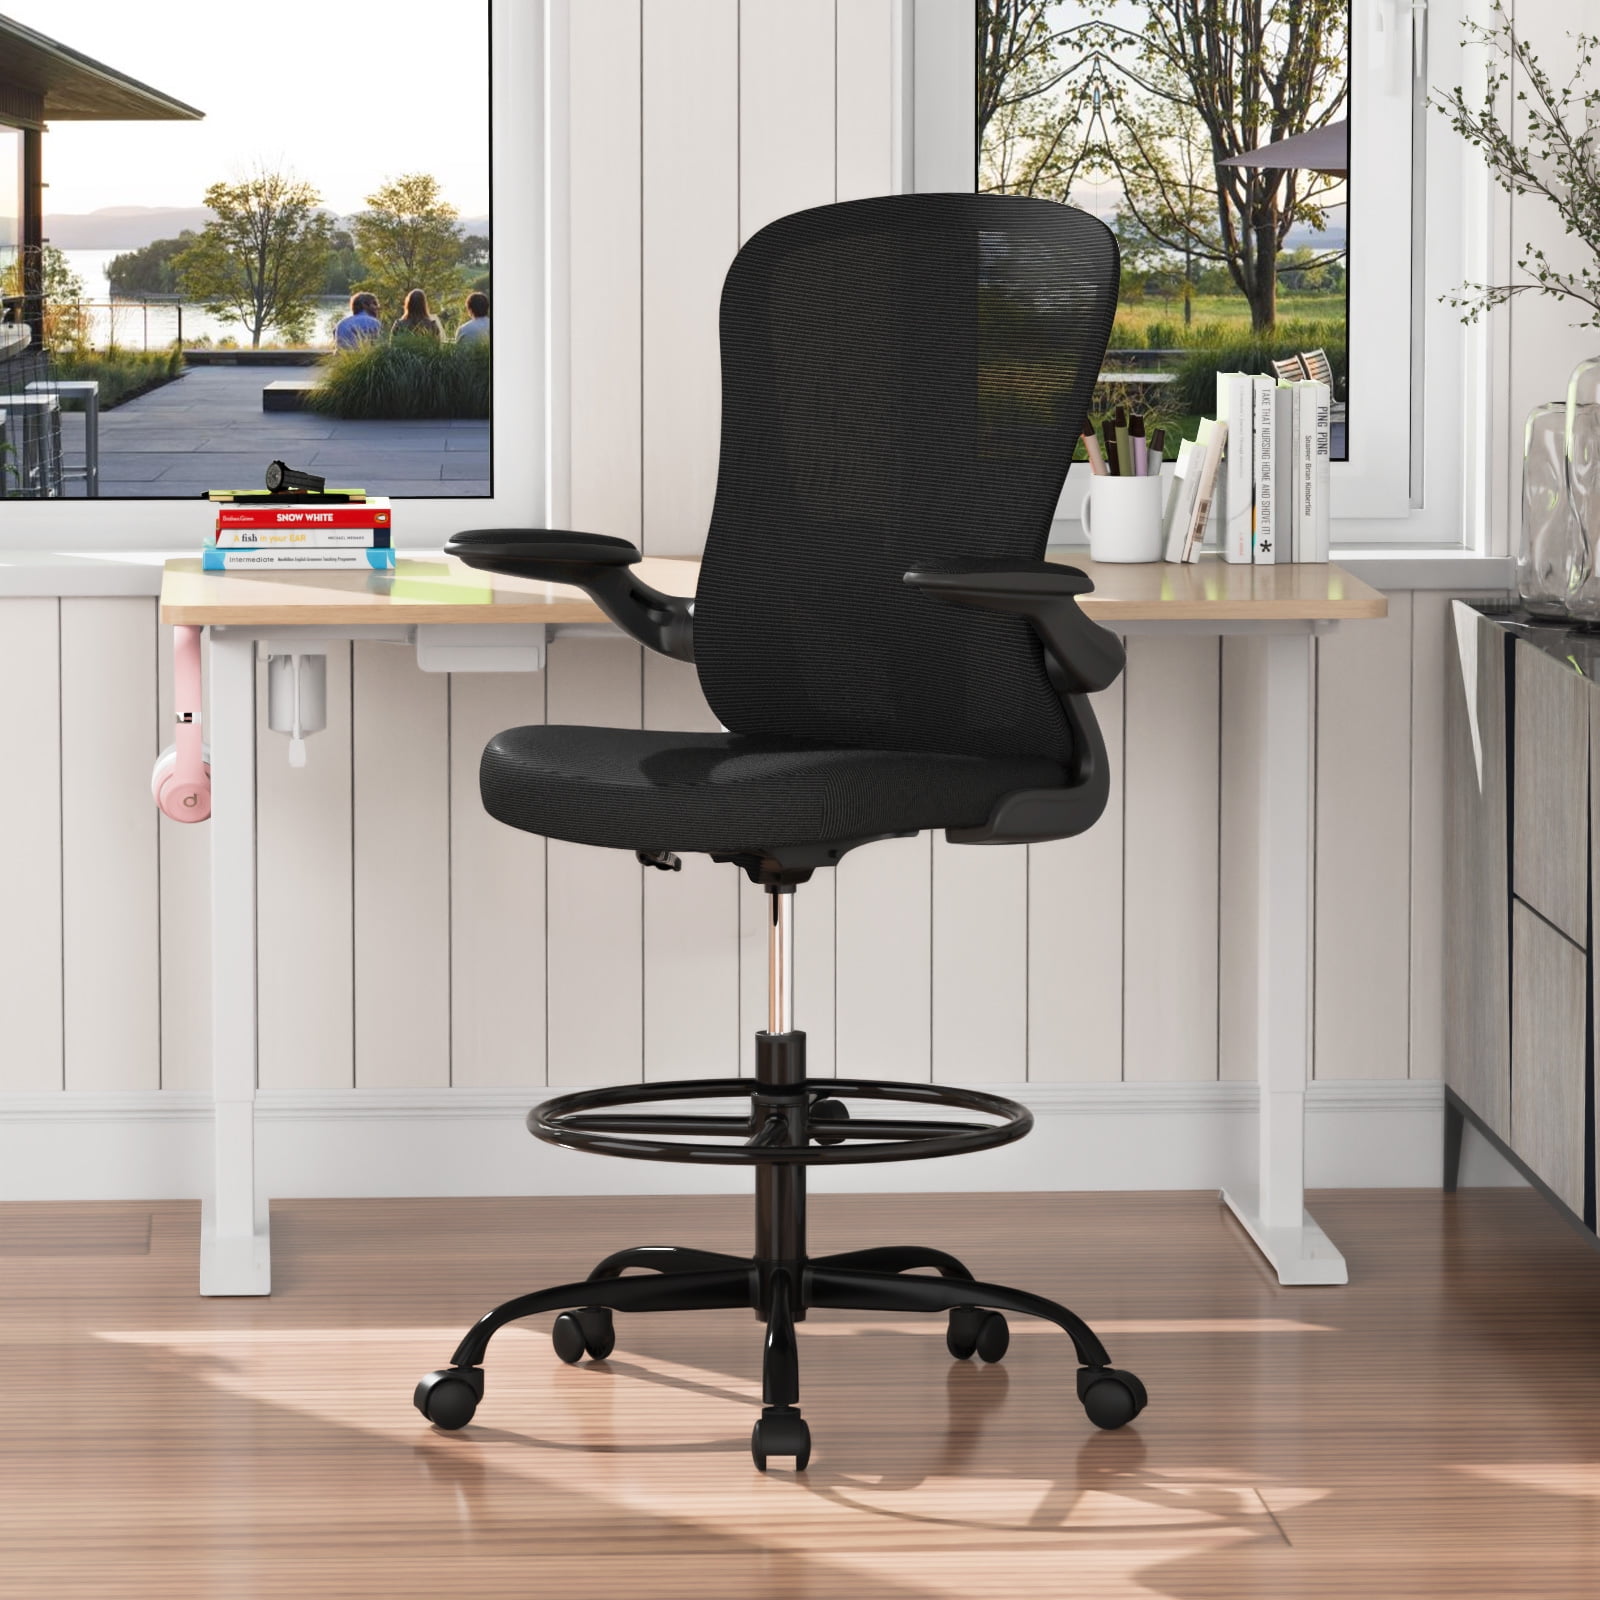 Homy Grigio Drafting Chair Tall Office Chair for Standing Desk